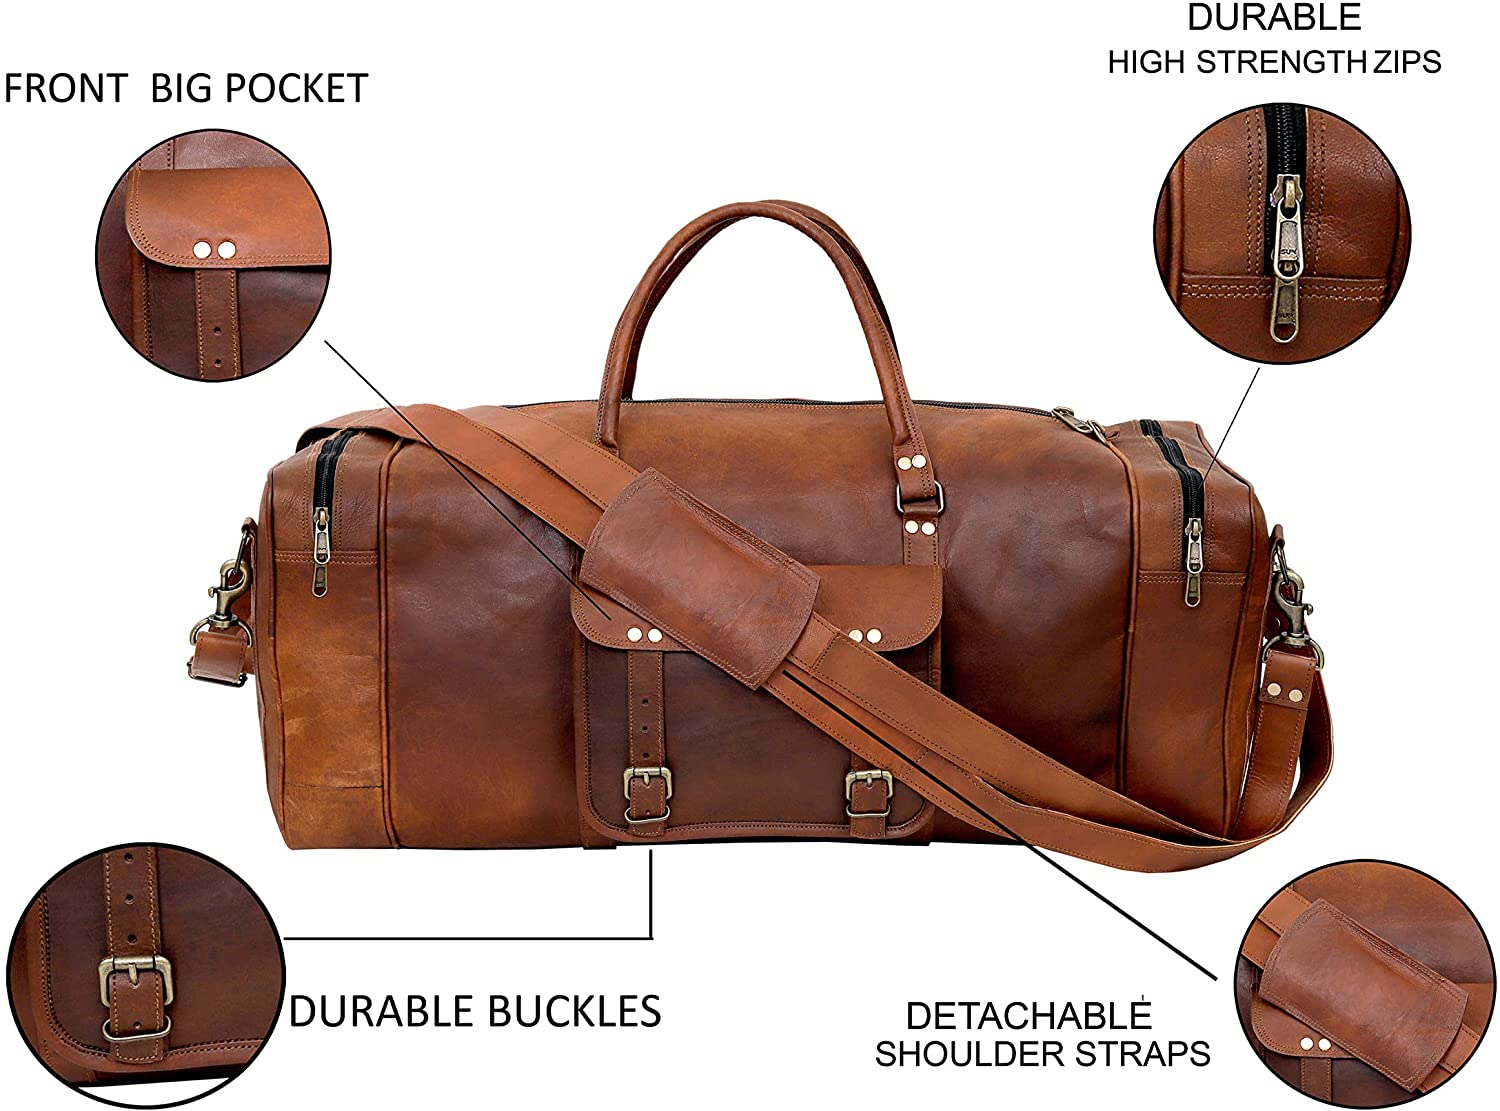 durable buckles leather duffle bag